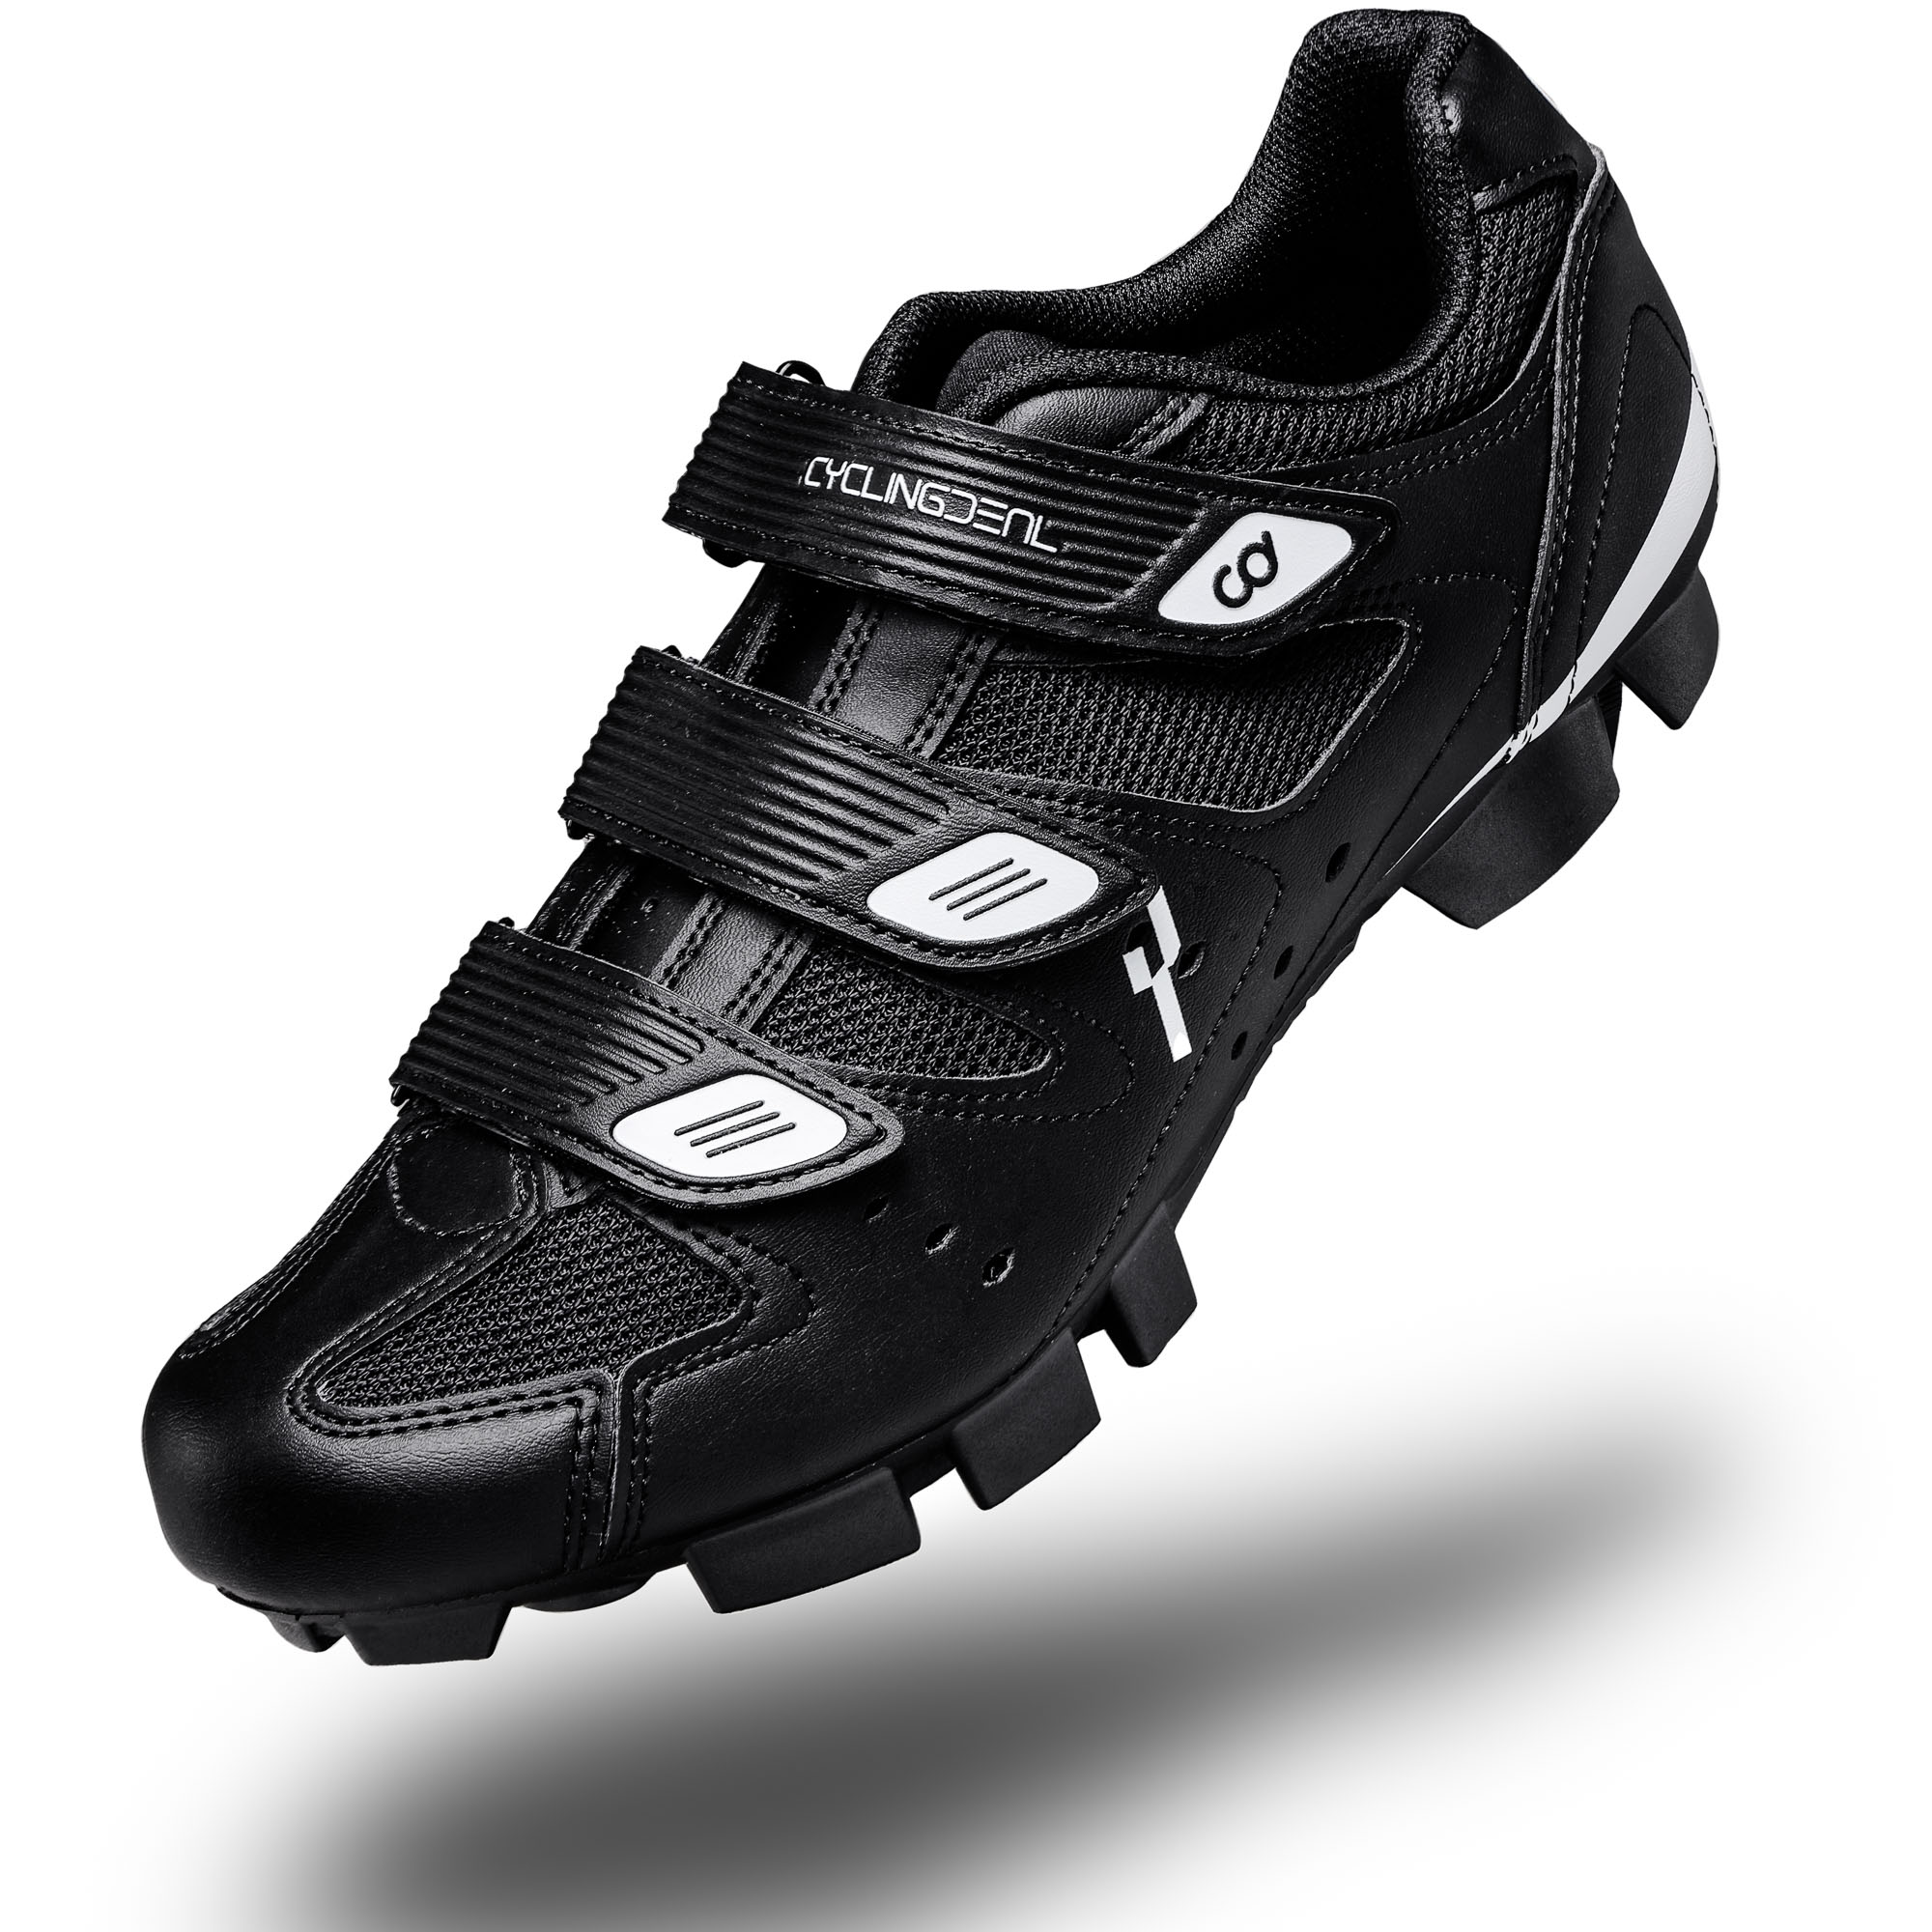 CyclingDeal Mountain Bicycle Bike Men's MTB Cycling Shoes Black Compatible with SHIMANO SPD and CrankBrothers Cleats | Size 45